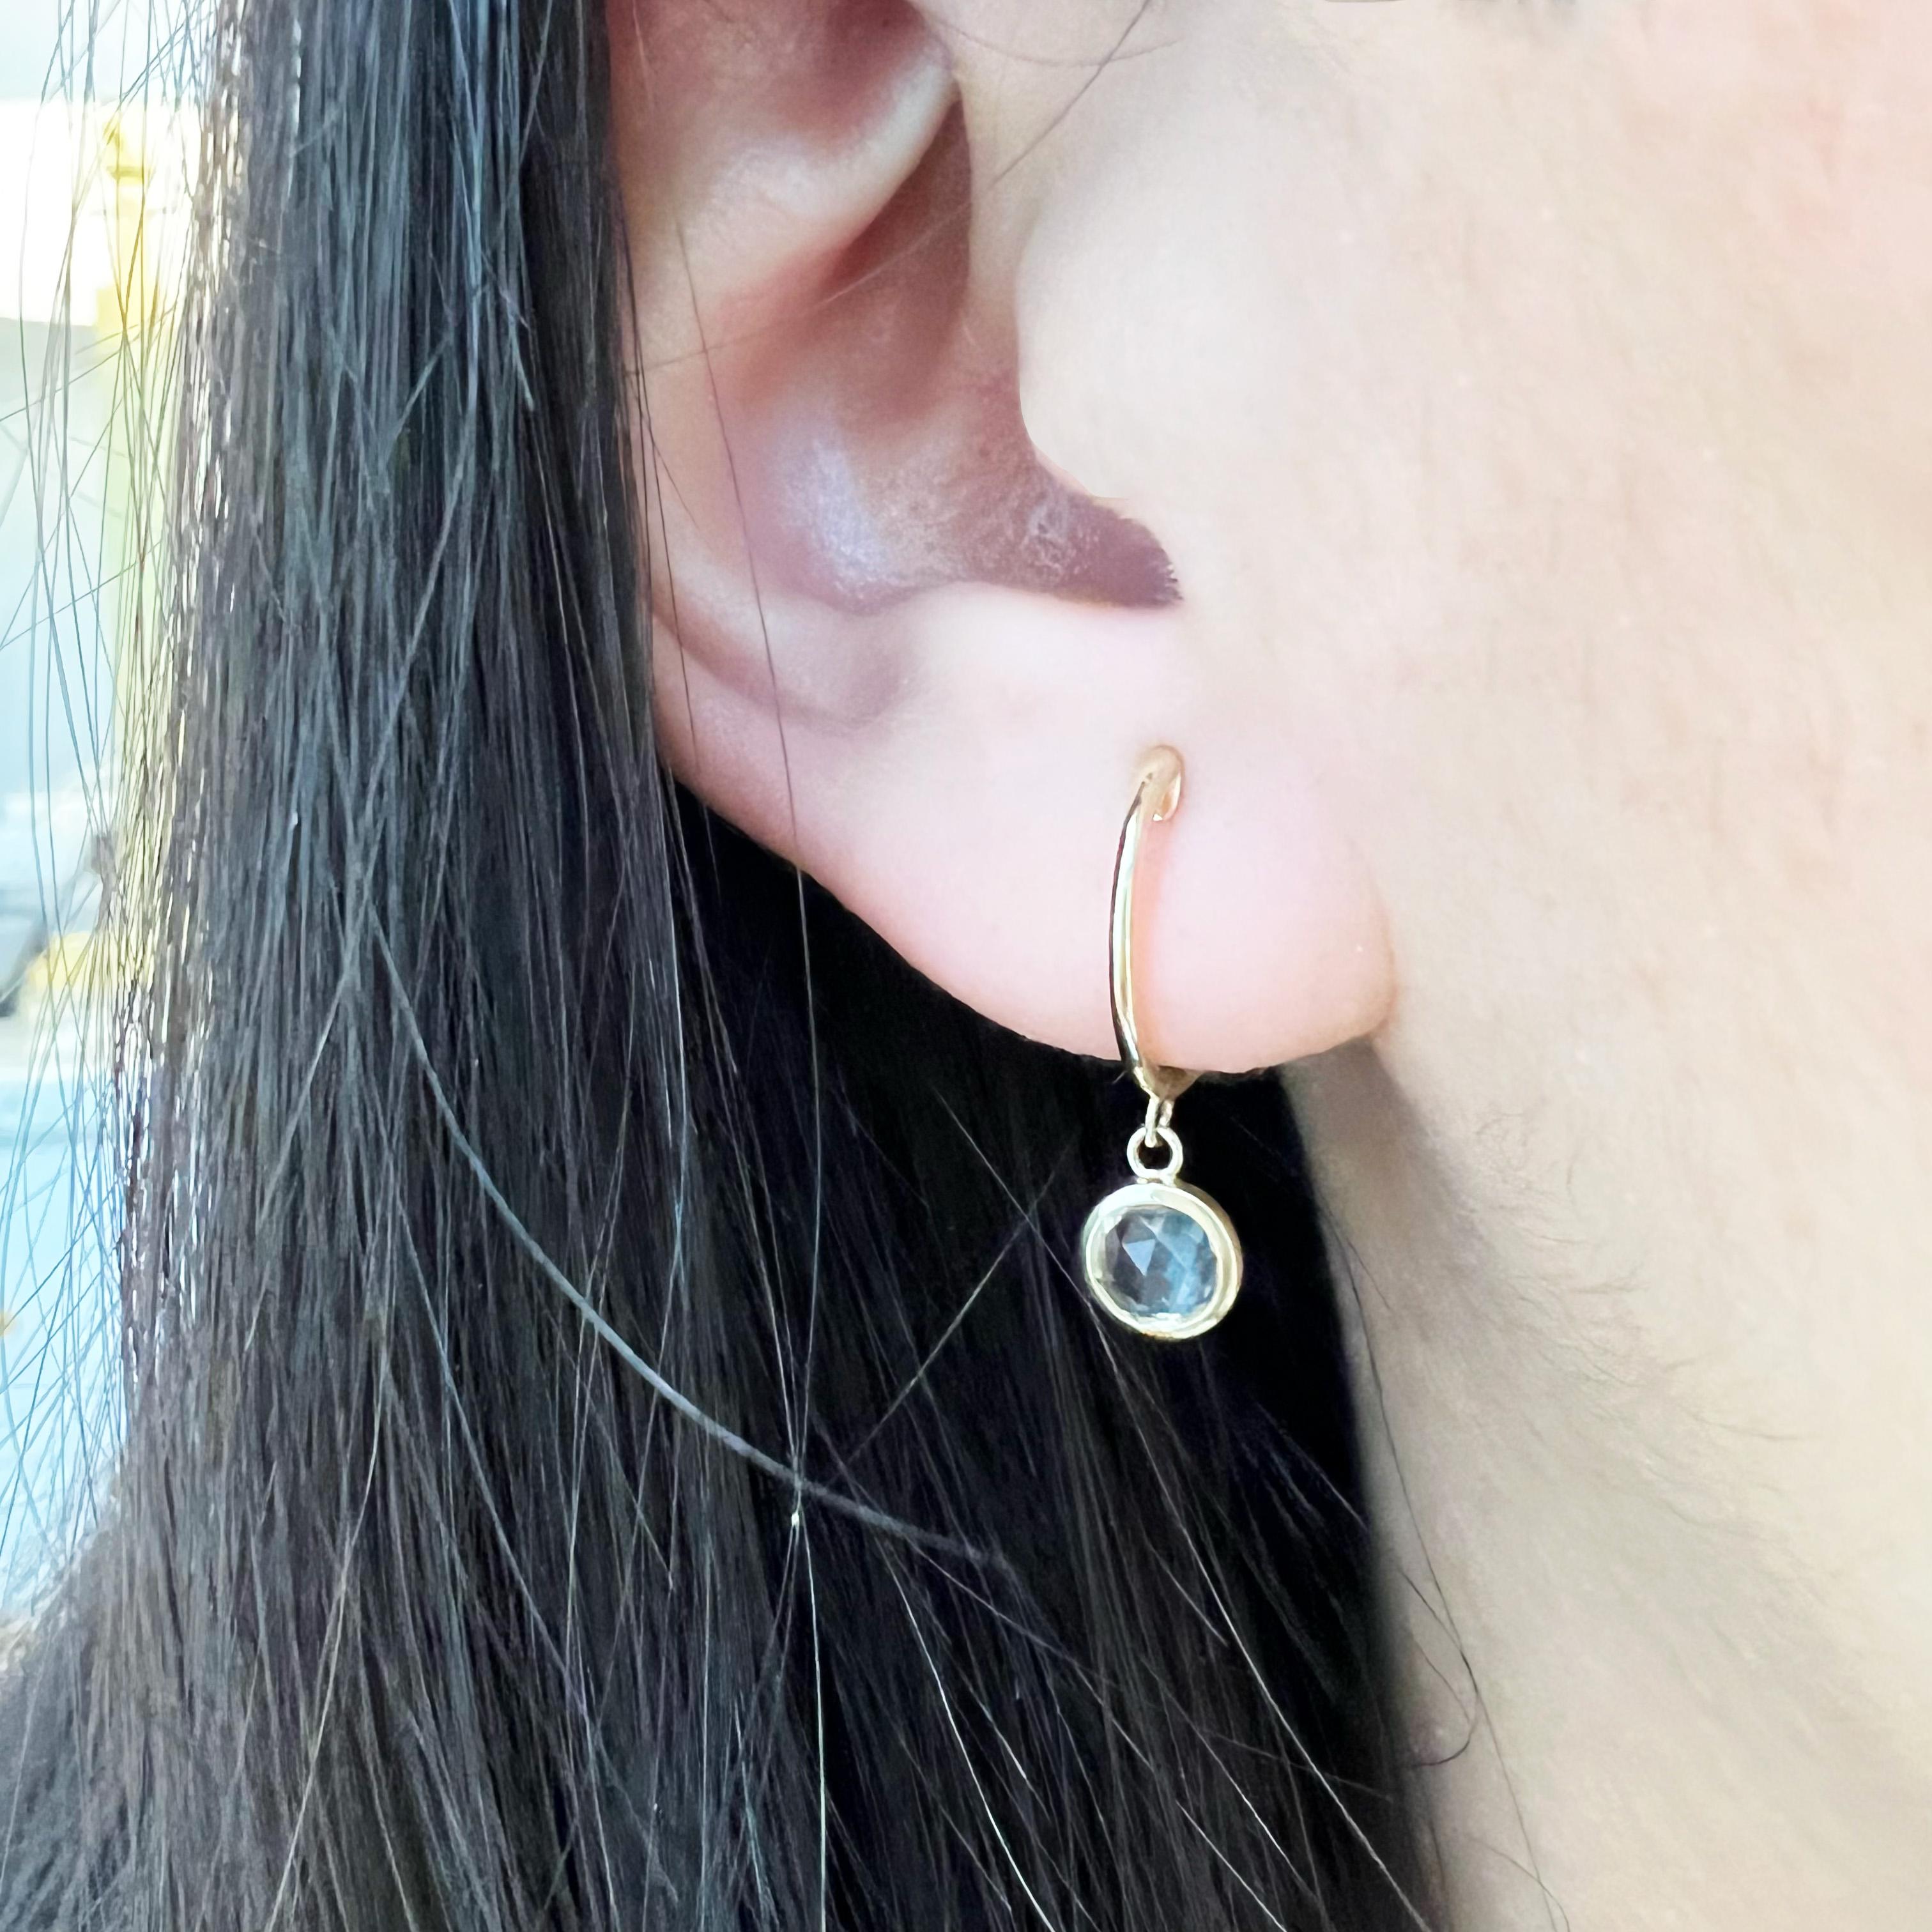 Style, comfort, and charm are the cornerstones of these fantastic huggie hoop dangle drop earrings! Huggie hoops are comfortable to wear day and night because the small diameter of the hoops are hard to snag on anything and no straight back of an